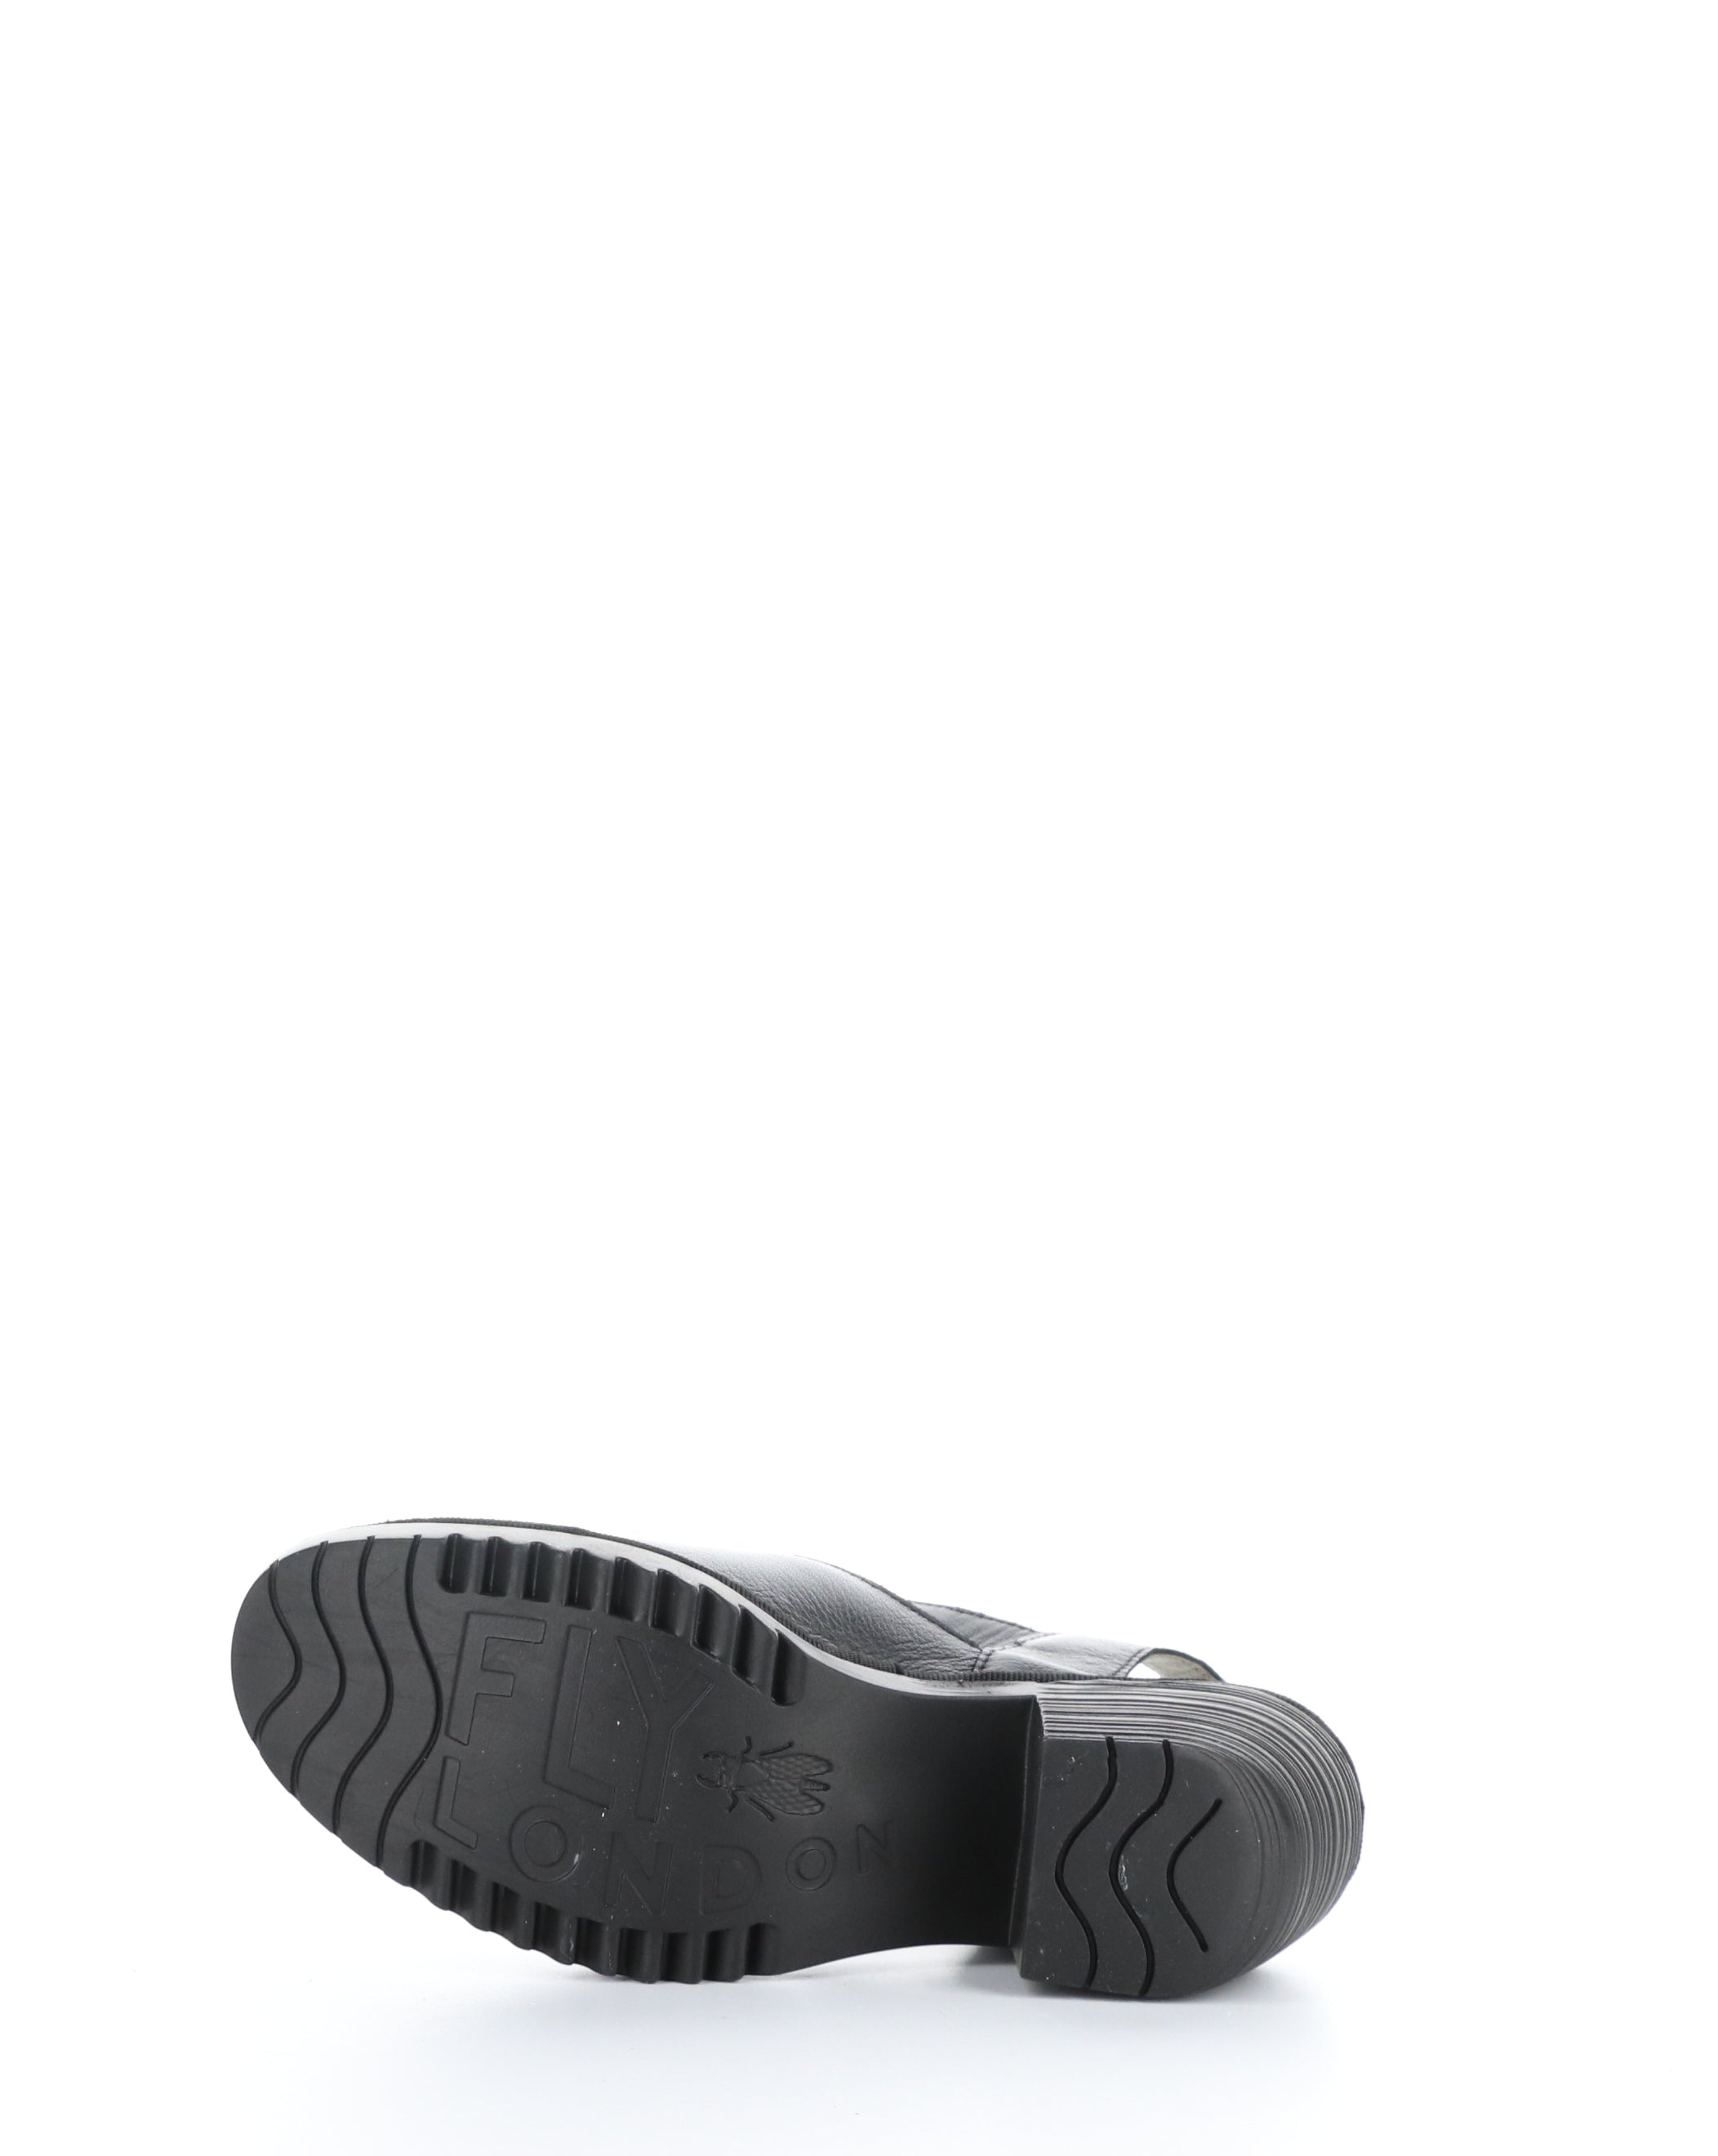 Fly London Wely Black Leather Sandal